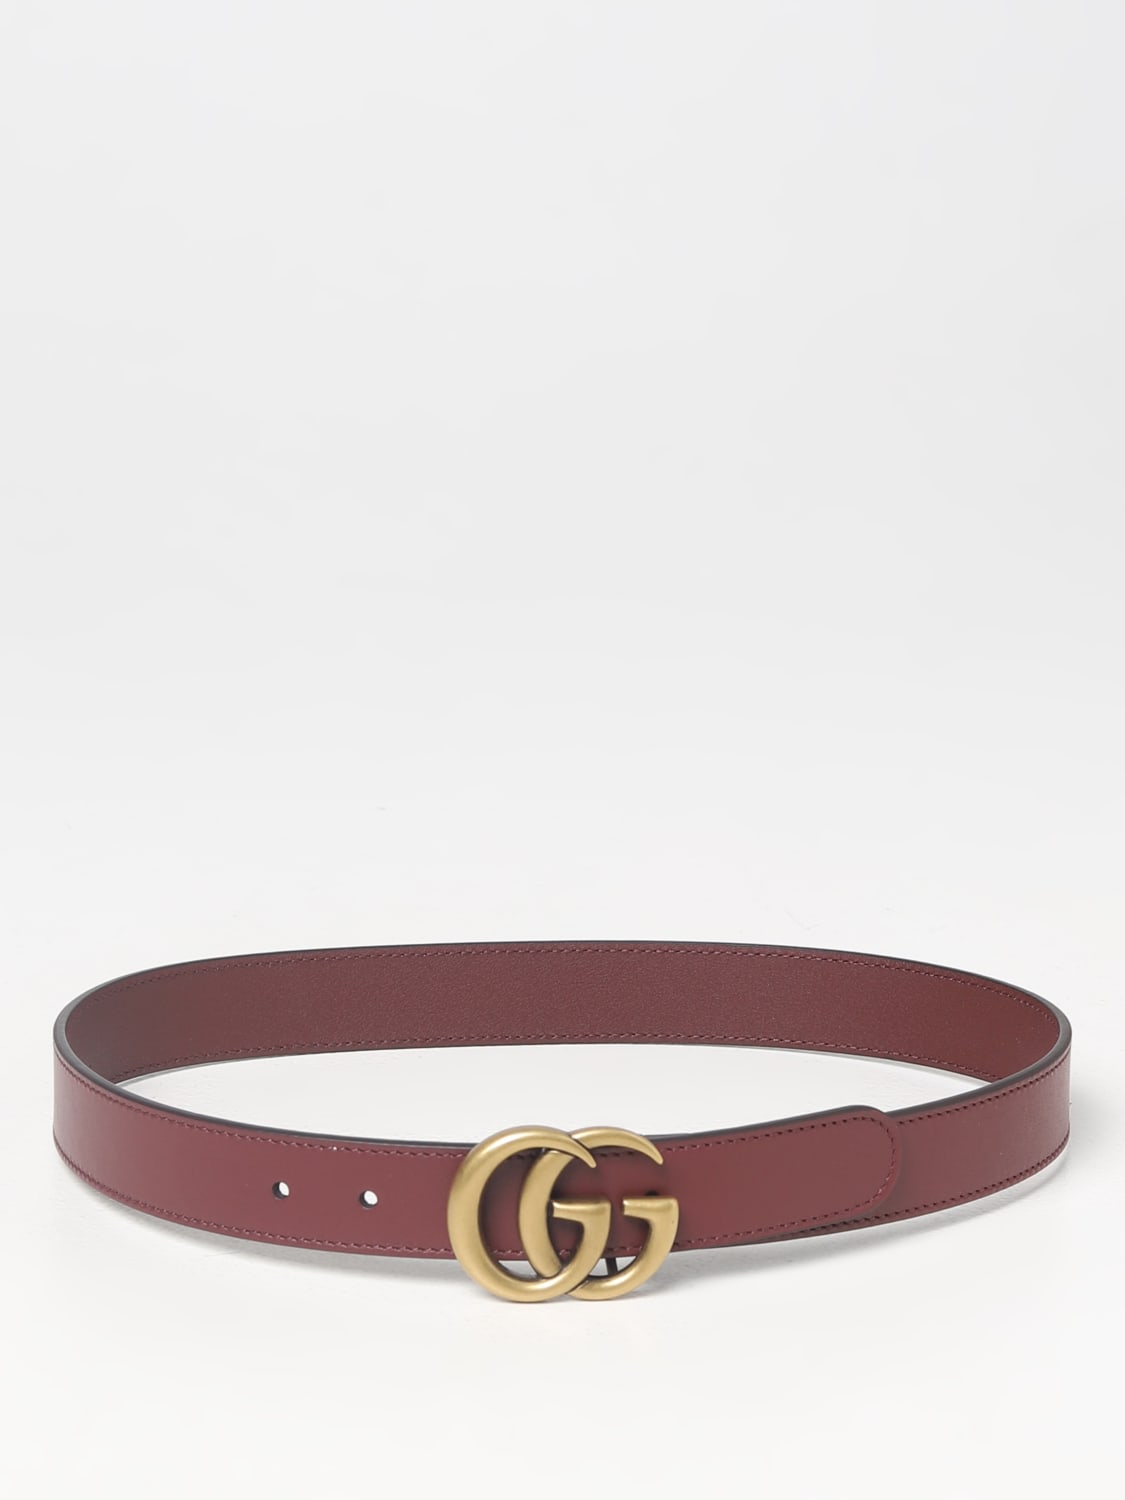 GUCCI: leather belt - Brown | Gucci belt 4327071AAOS online at GIGLIO.COM